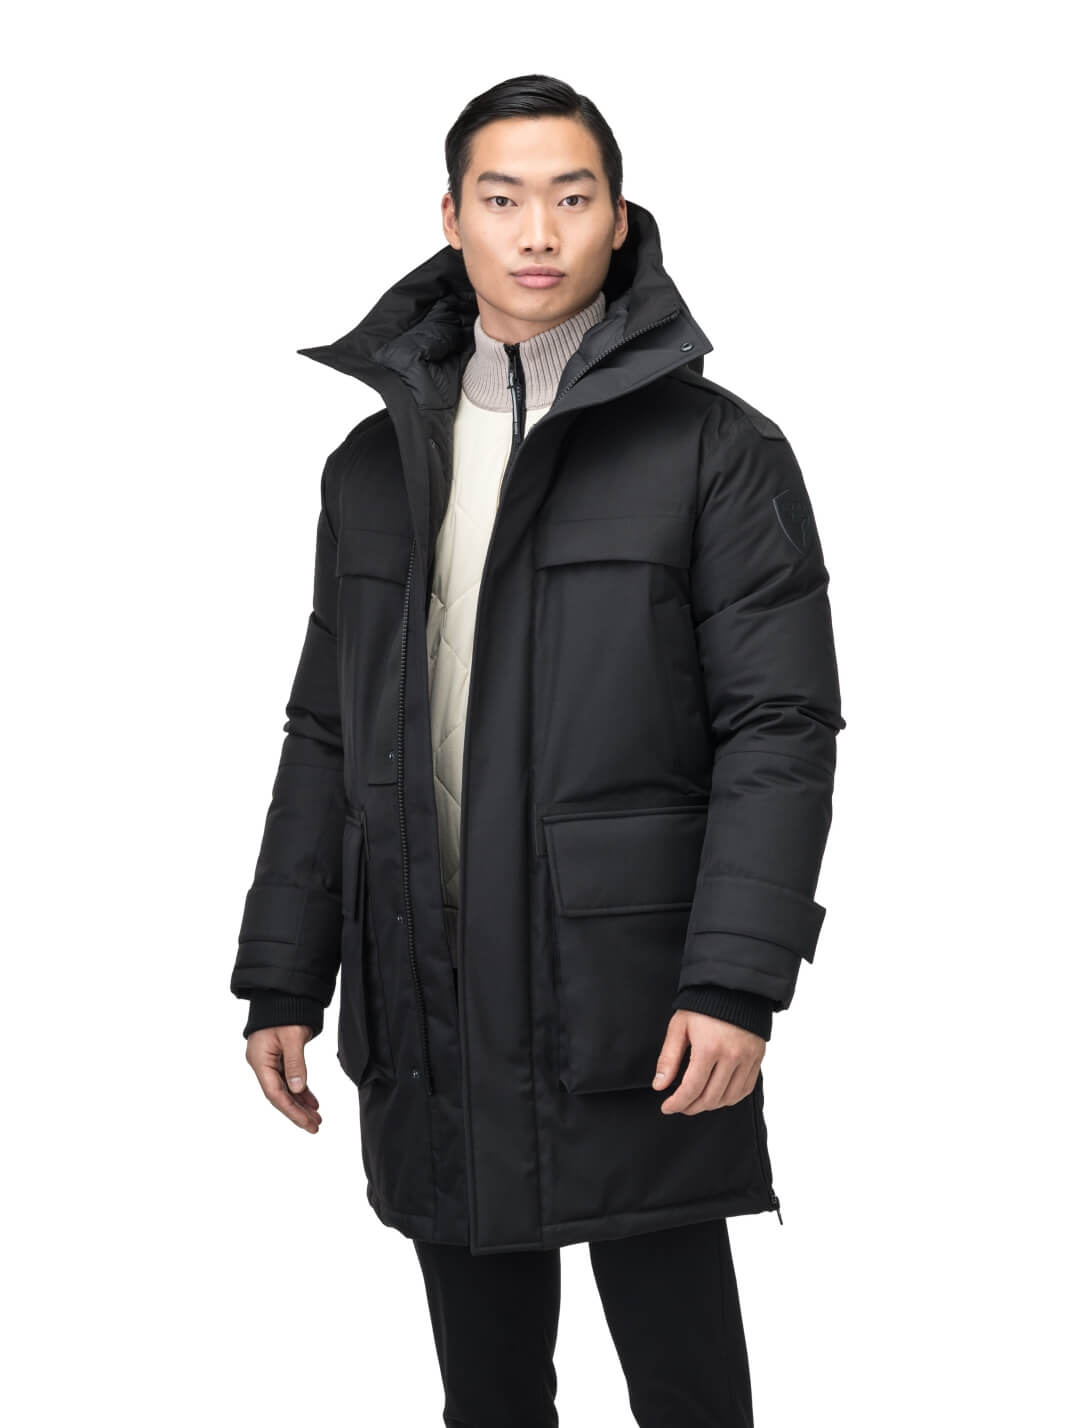 Alum Men's Long Parka in thigh length, Premium Canadian White Duck Down insulation, non-removable hood with removable coyote fur trim, two-way centre front zipper with magnetic closure wind flap, four exterior patch pockets at front, in Black